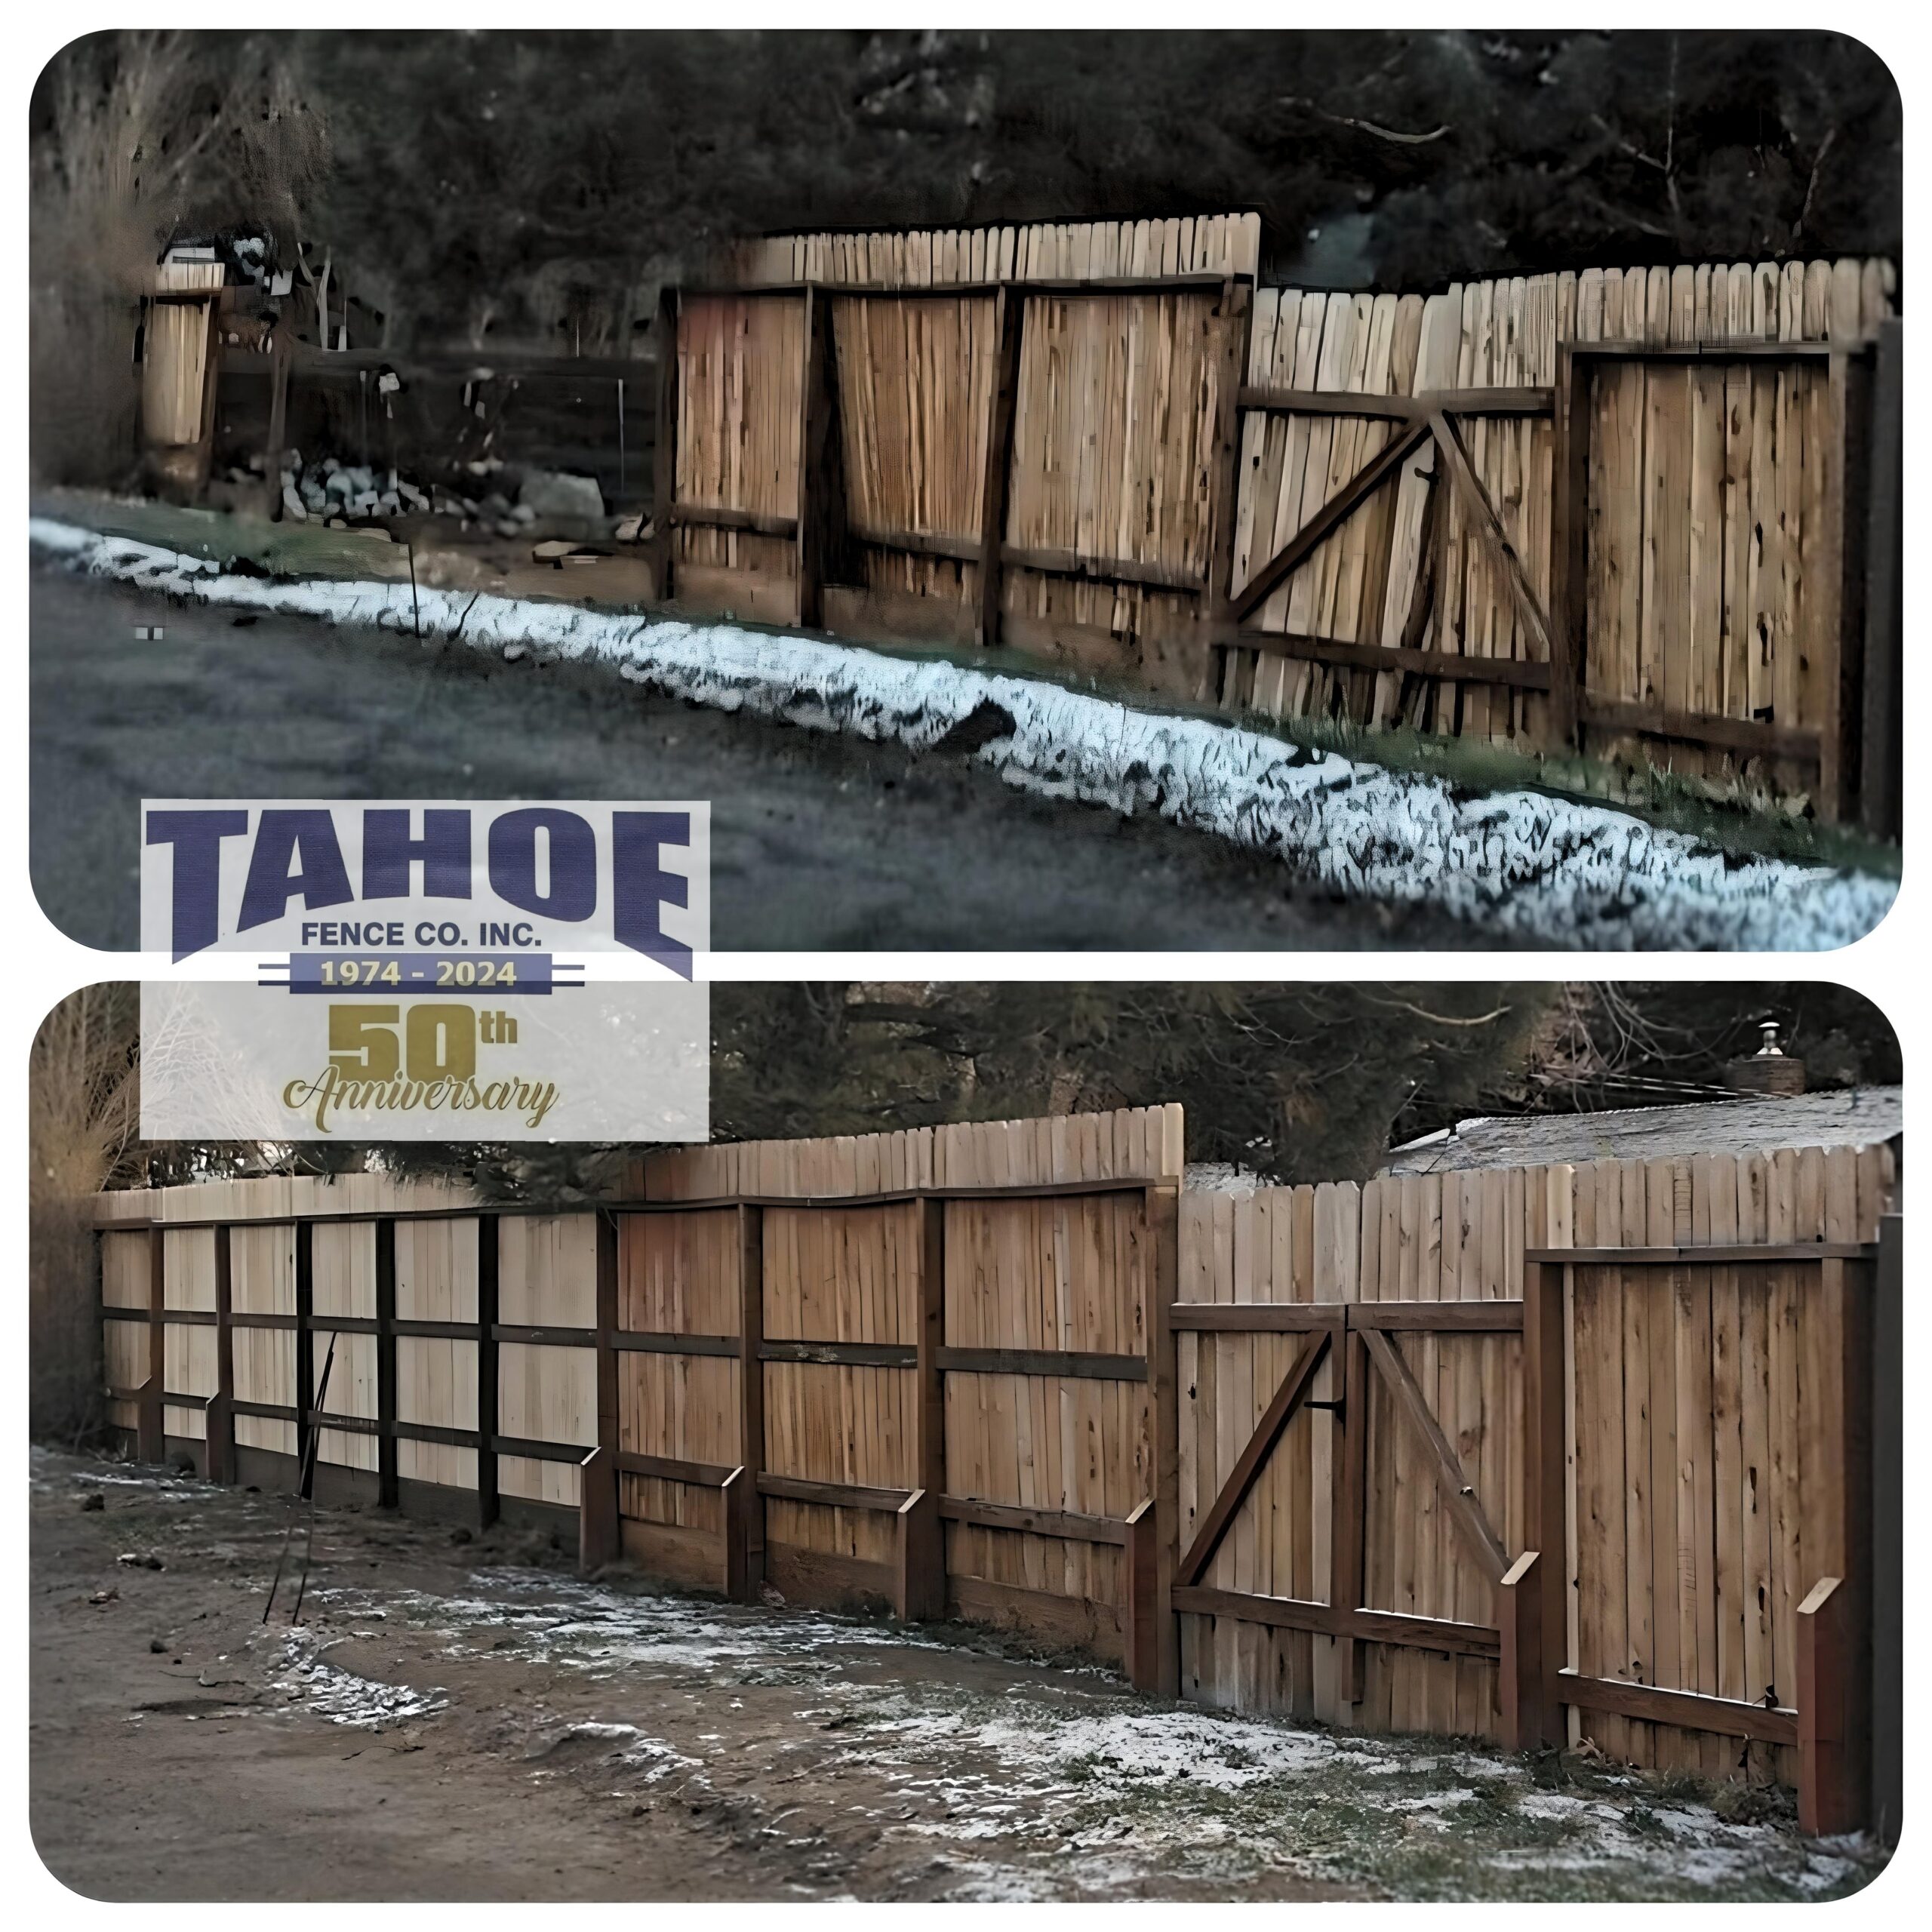 Our Business Is You
Tahoe Fence is a Better Business Bureau accredited company again this year. And for the most part, it's because of you, our customers. 
Our business is you.
It's Tahoe's 50th year in business. We've built a lot of lasting fences in that time. But we're even prouder of the relationships we've built and maintain.
Some relationships have lasted years. While others continue into the next generation.
Pictured: Before and after of cedar fence repaired by Tahoe's crews following wind and tree damage in Carson City (2024.)